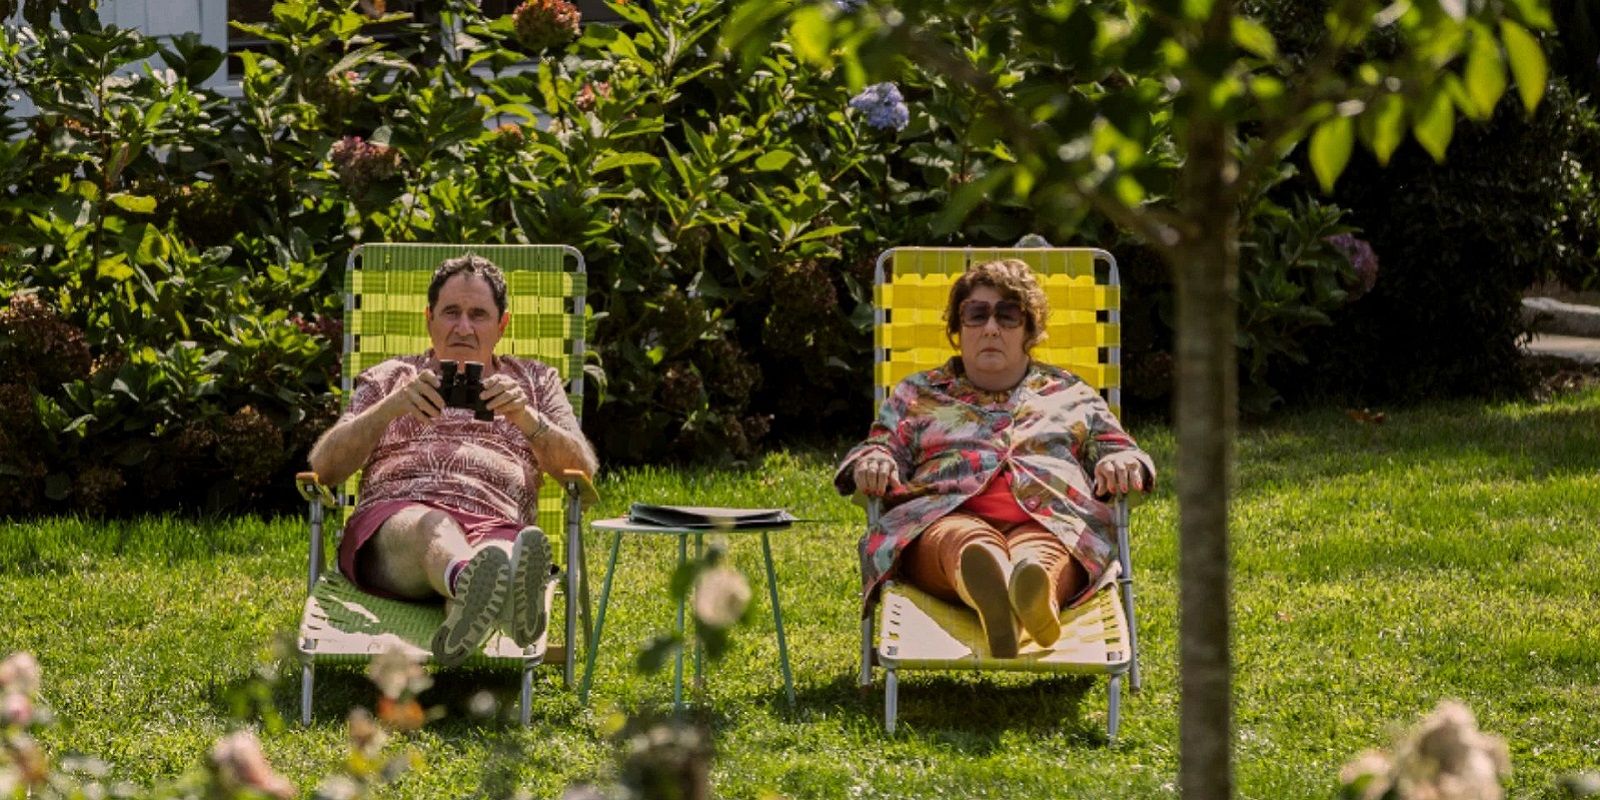 Margo Martindale And Richard Kind As the neighbors, Maureen and Mitch, in The Watcher